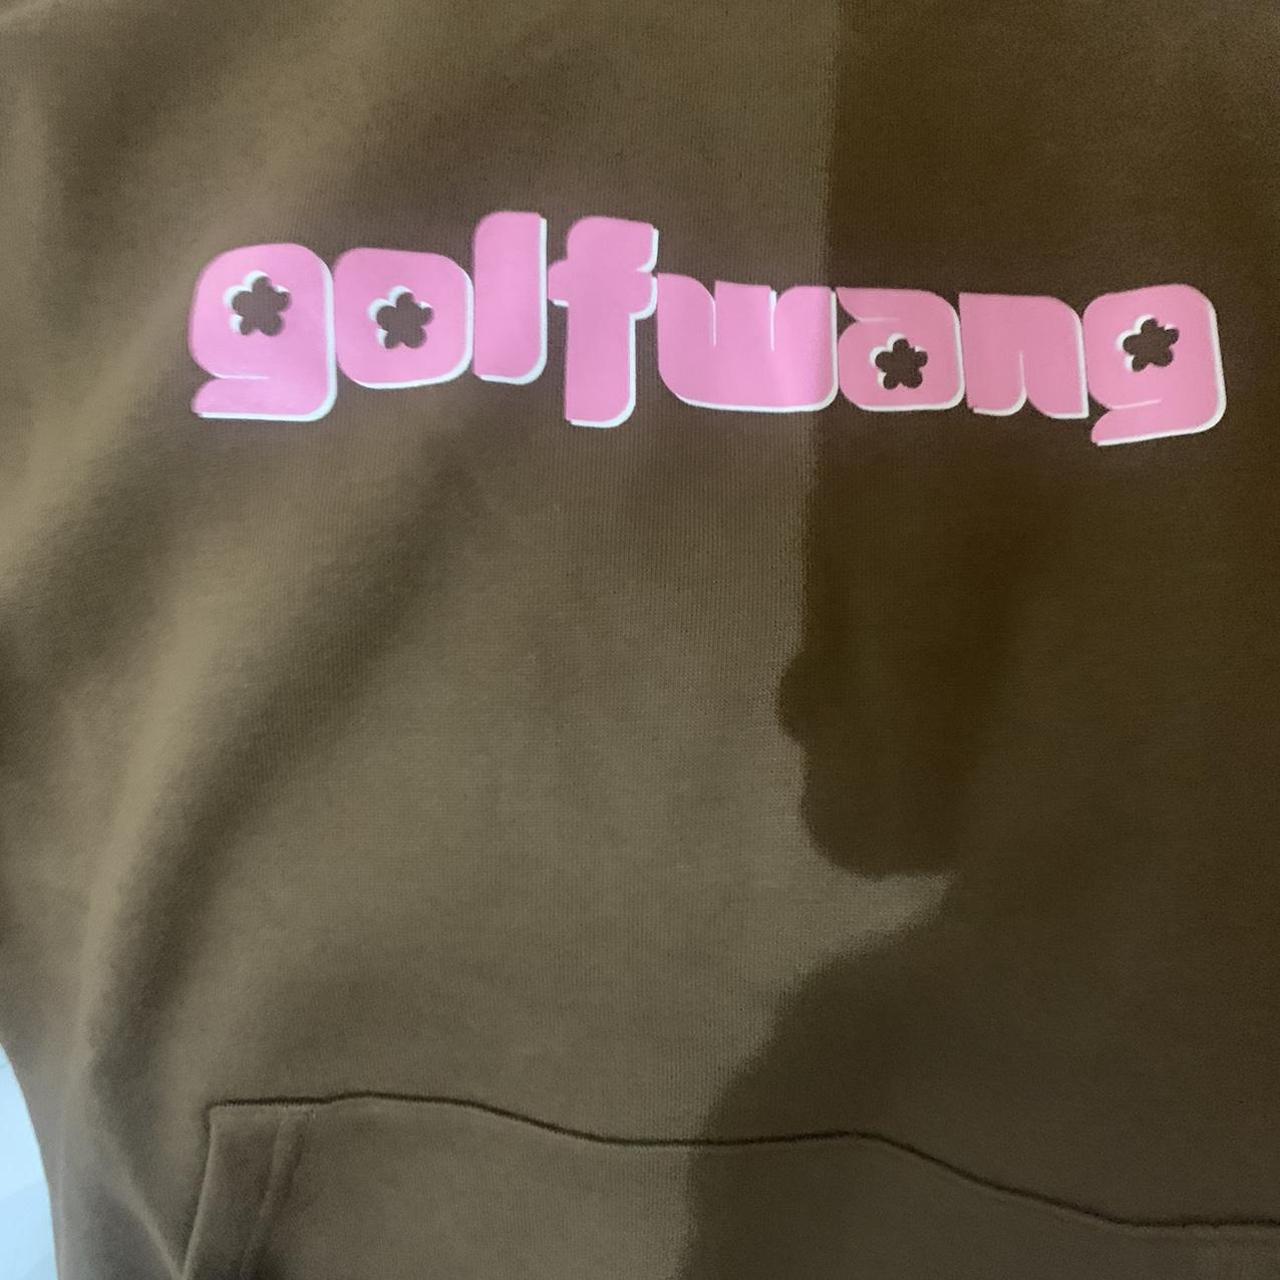 Golf wang hoodie with pink logo. Sold out on... - Depop